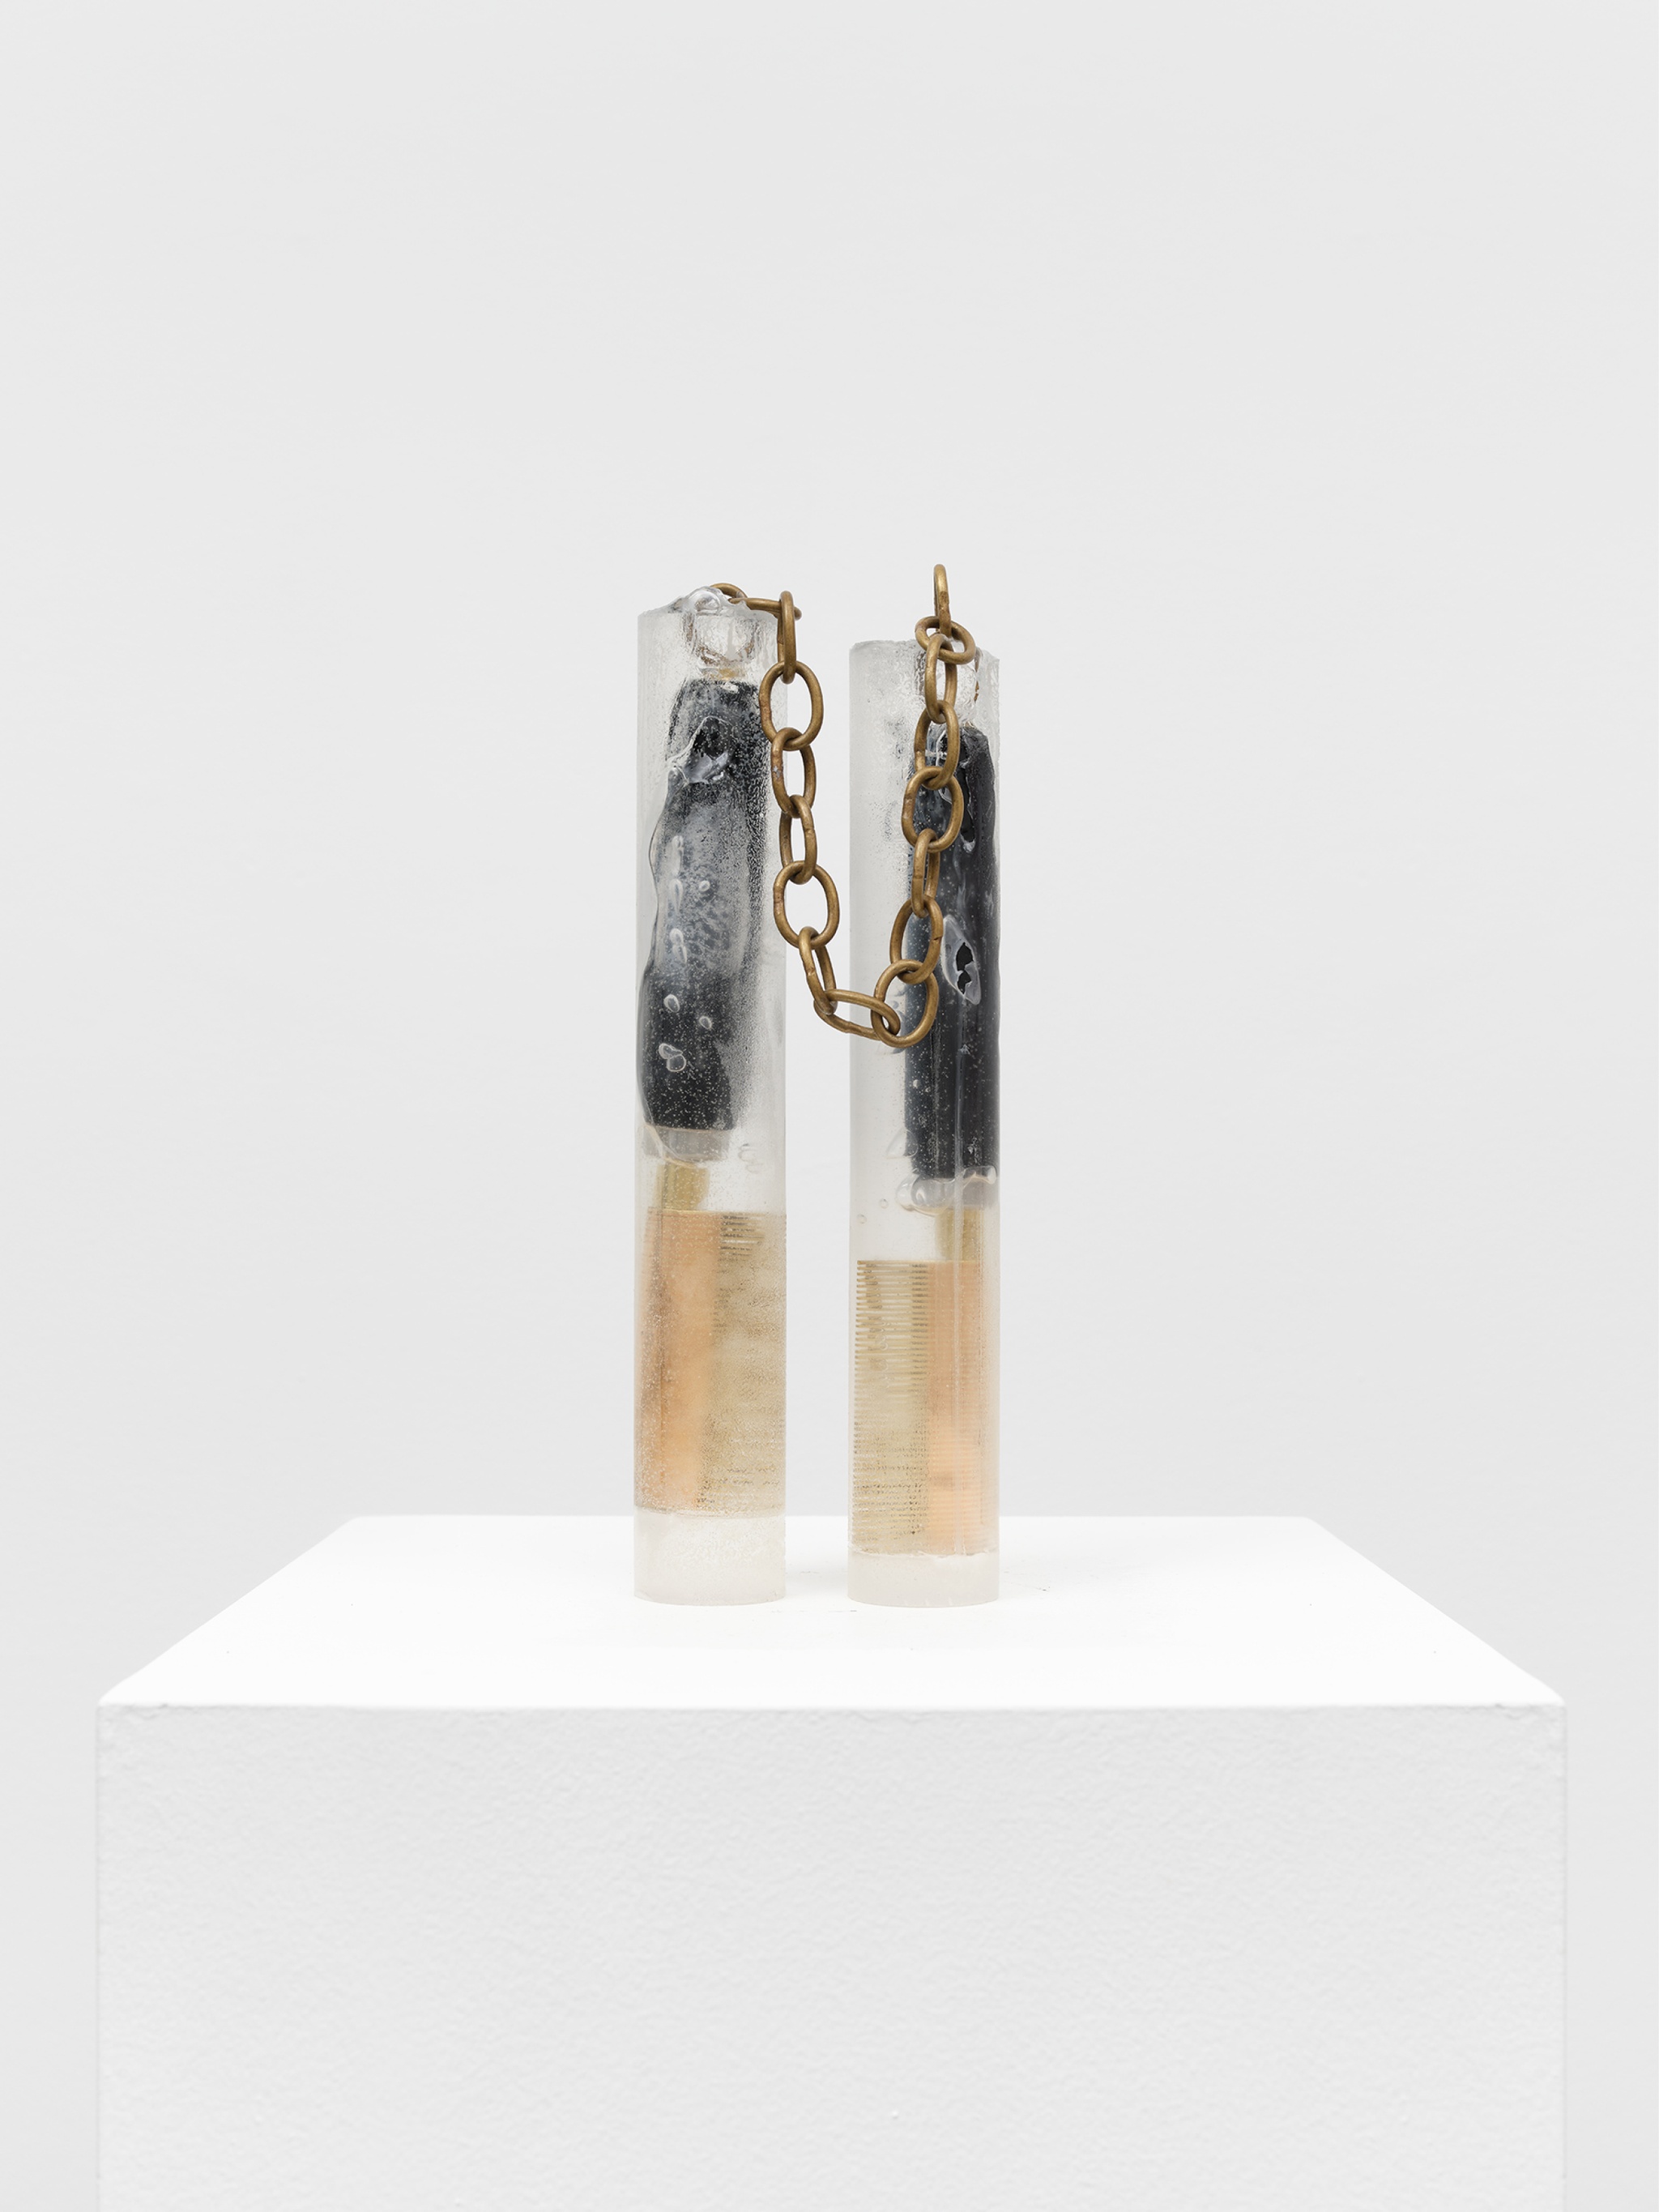 A sculpture resembling nunchuks, with the bars in resin containing wood and brass hot combs. The two pieces are linked by a brass chain.